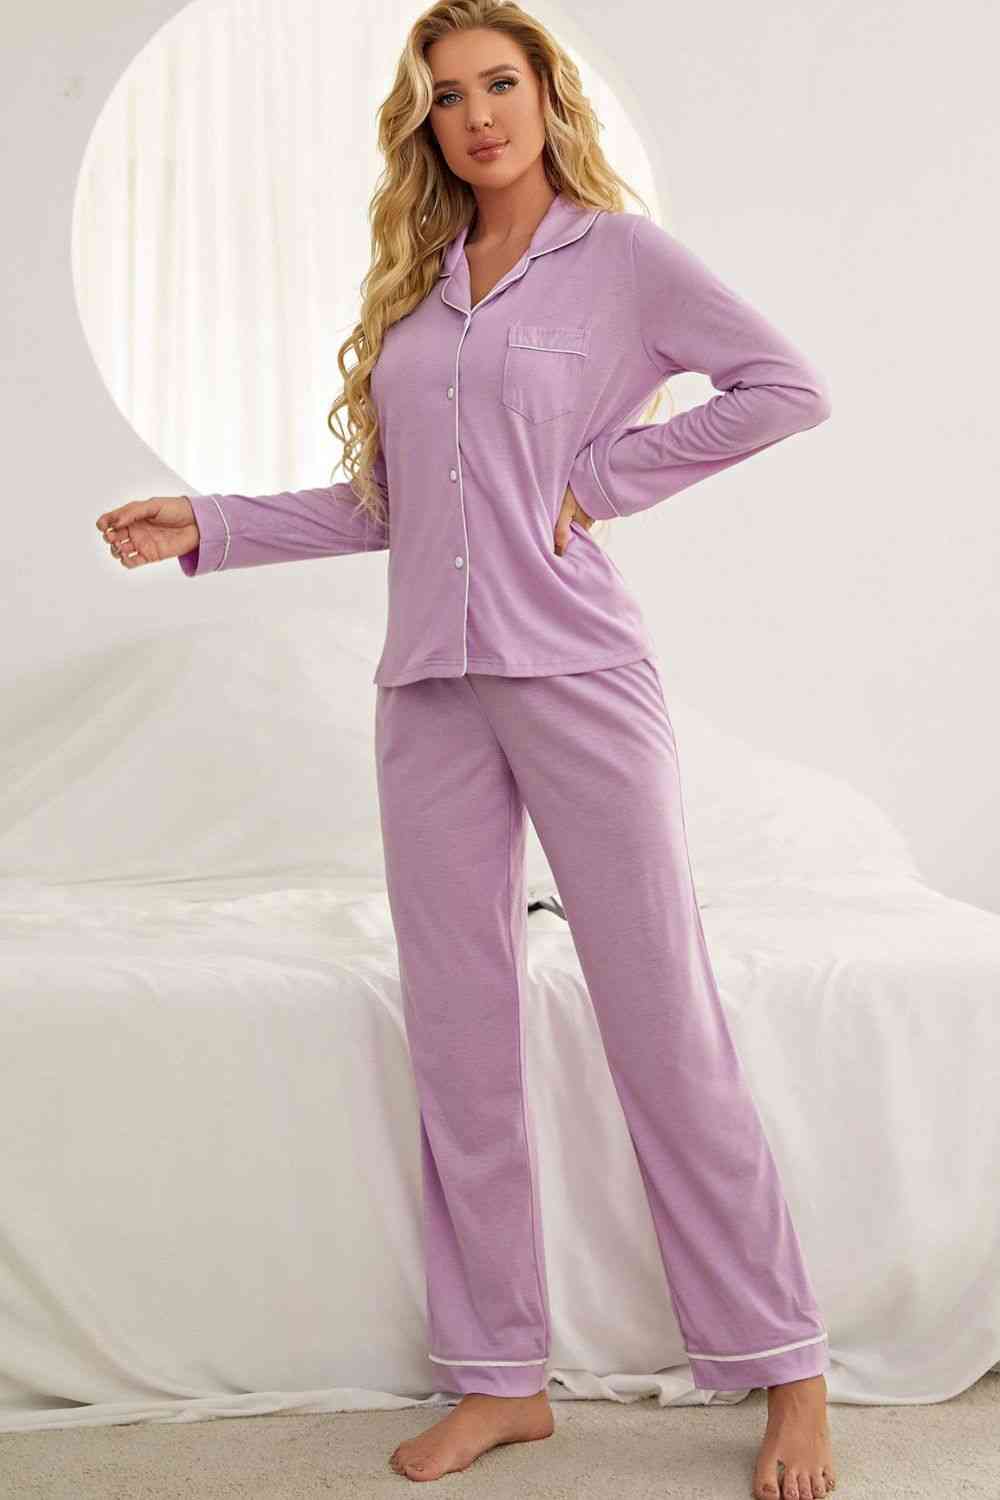 Contrast Piping Button Down Top and Pants Loungewear Set (2 Colors) Loungewear Krazy Heart Designs Boutique   